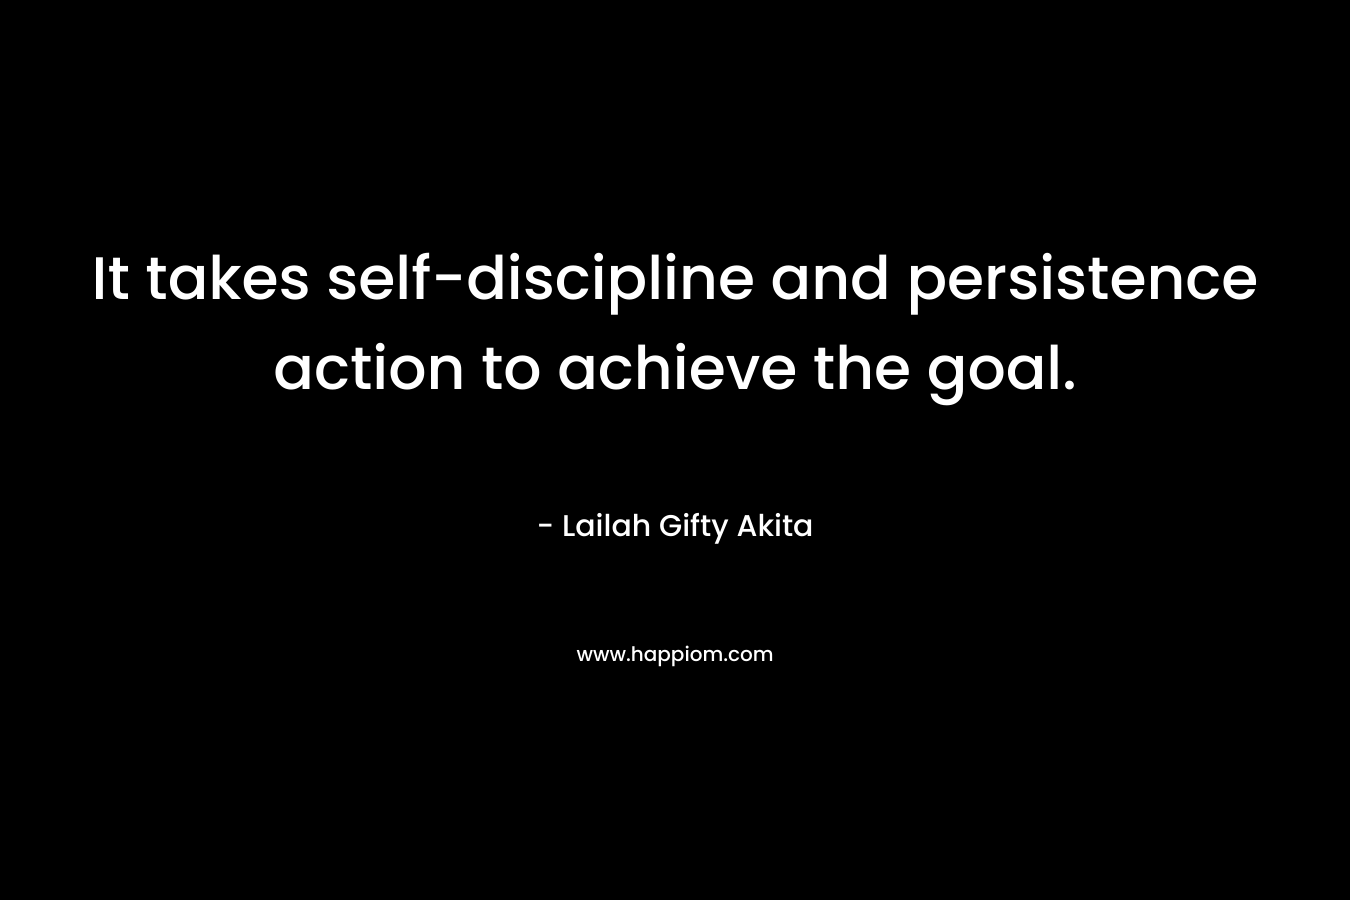 It takes self-discipline and persistence action to achieve the goal. – Lailah Gifty Akita